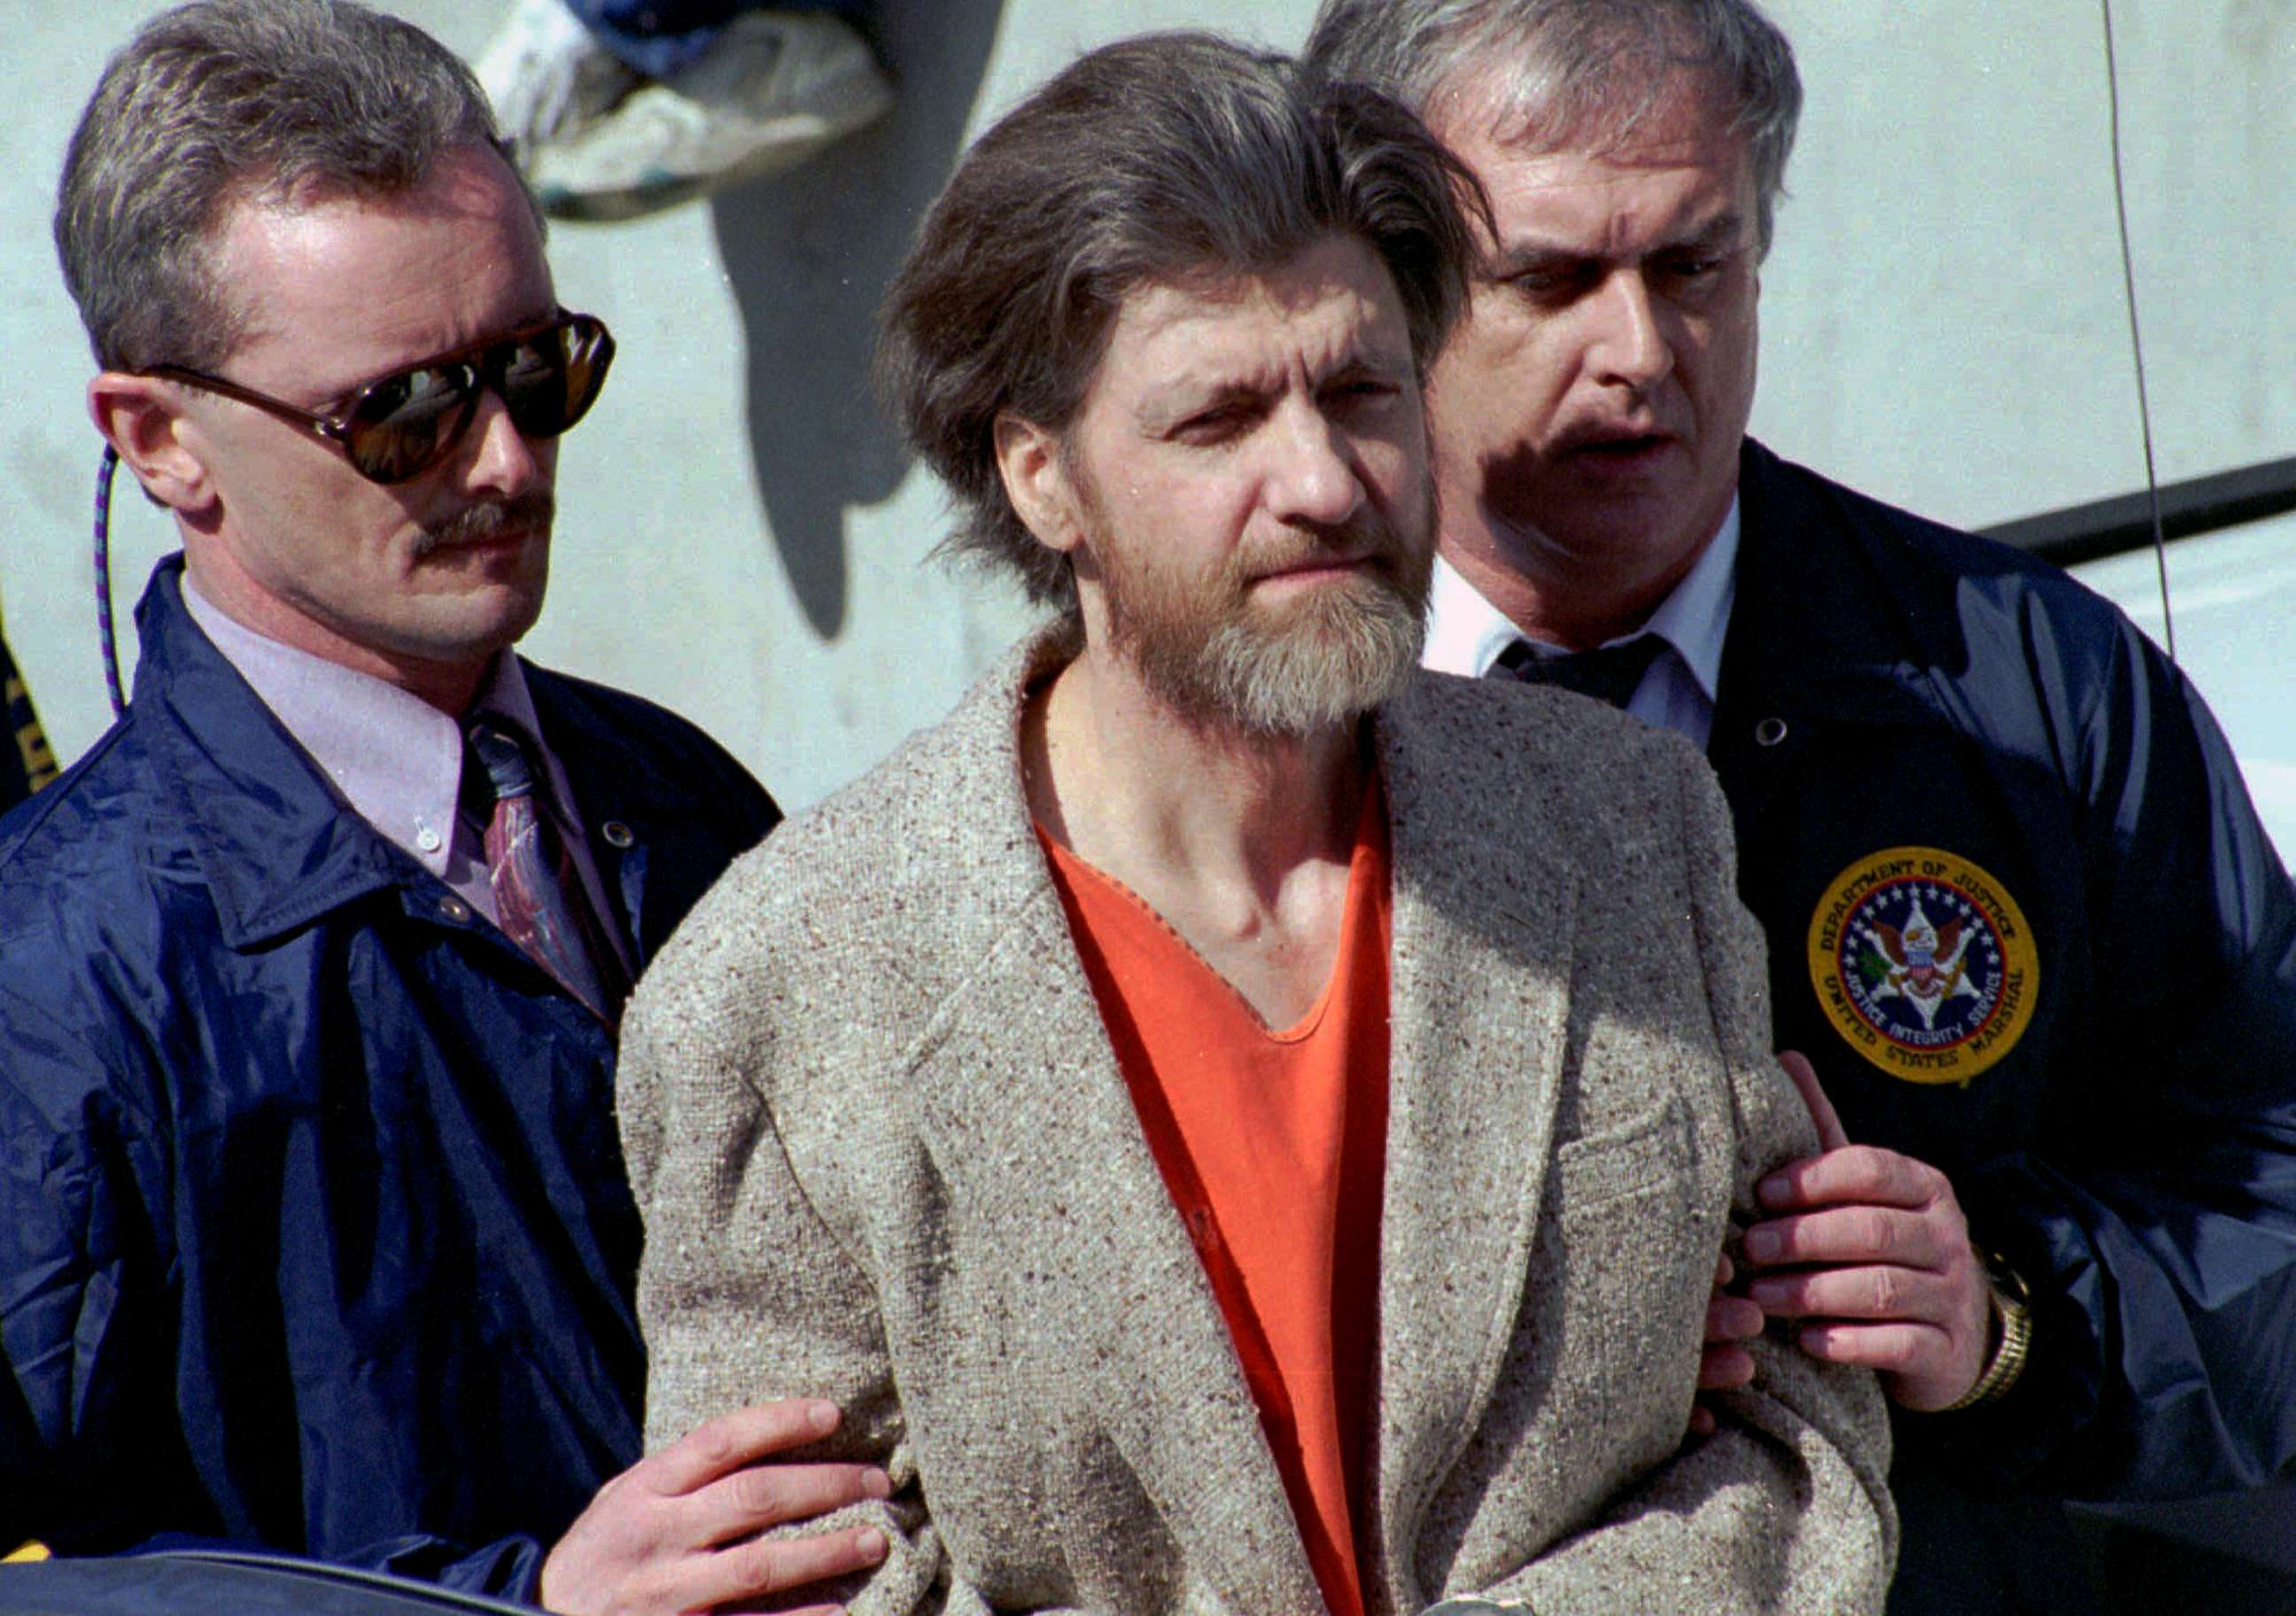 PHOTO: Ted Kaczynski, better known as the Unabomber, is flanked by federal agents as he is led to a car from the federal courthouse in Helena, Mont., April 4, 1996.